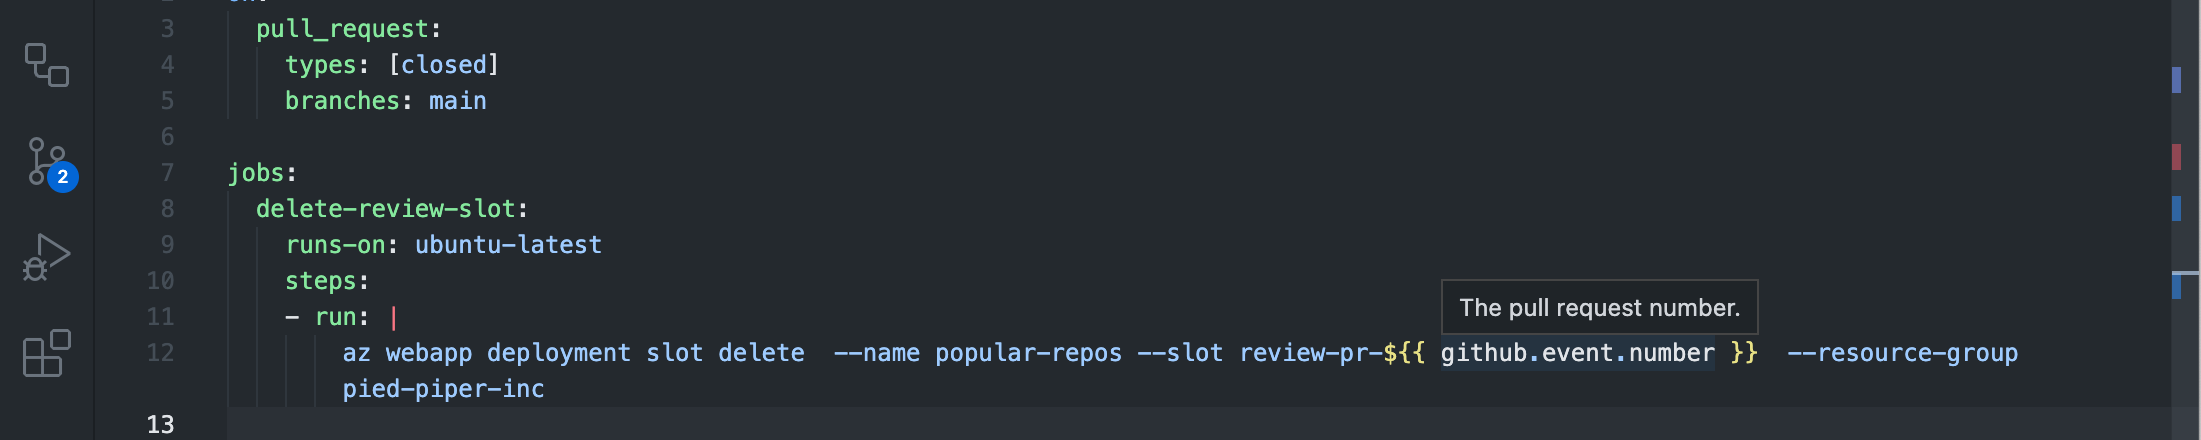 Tooltip showing description for a pull_request payload